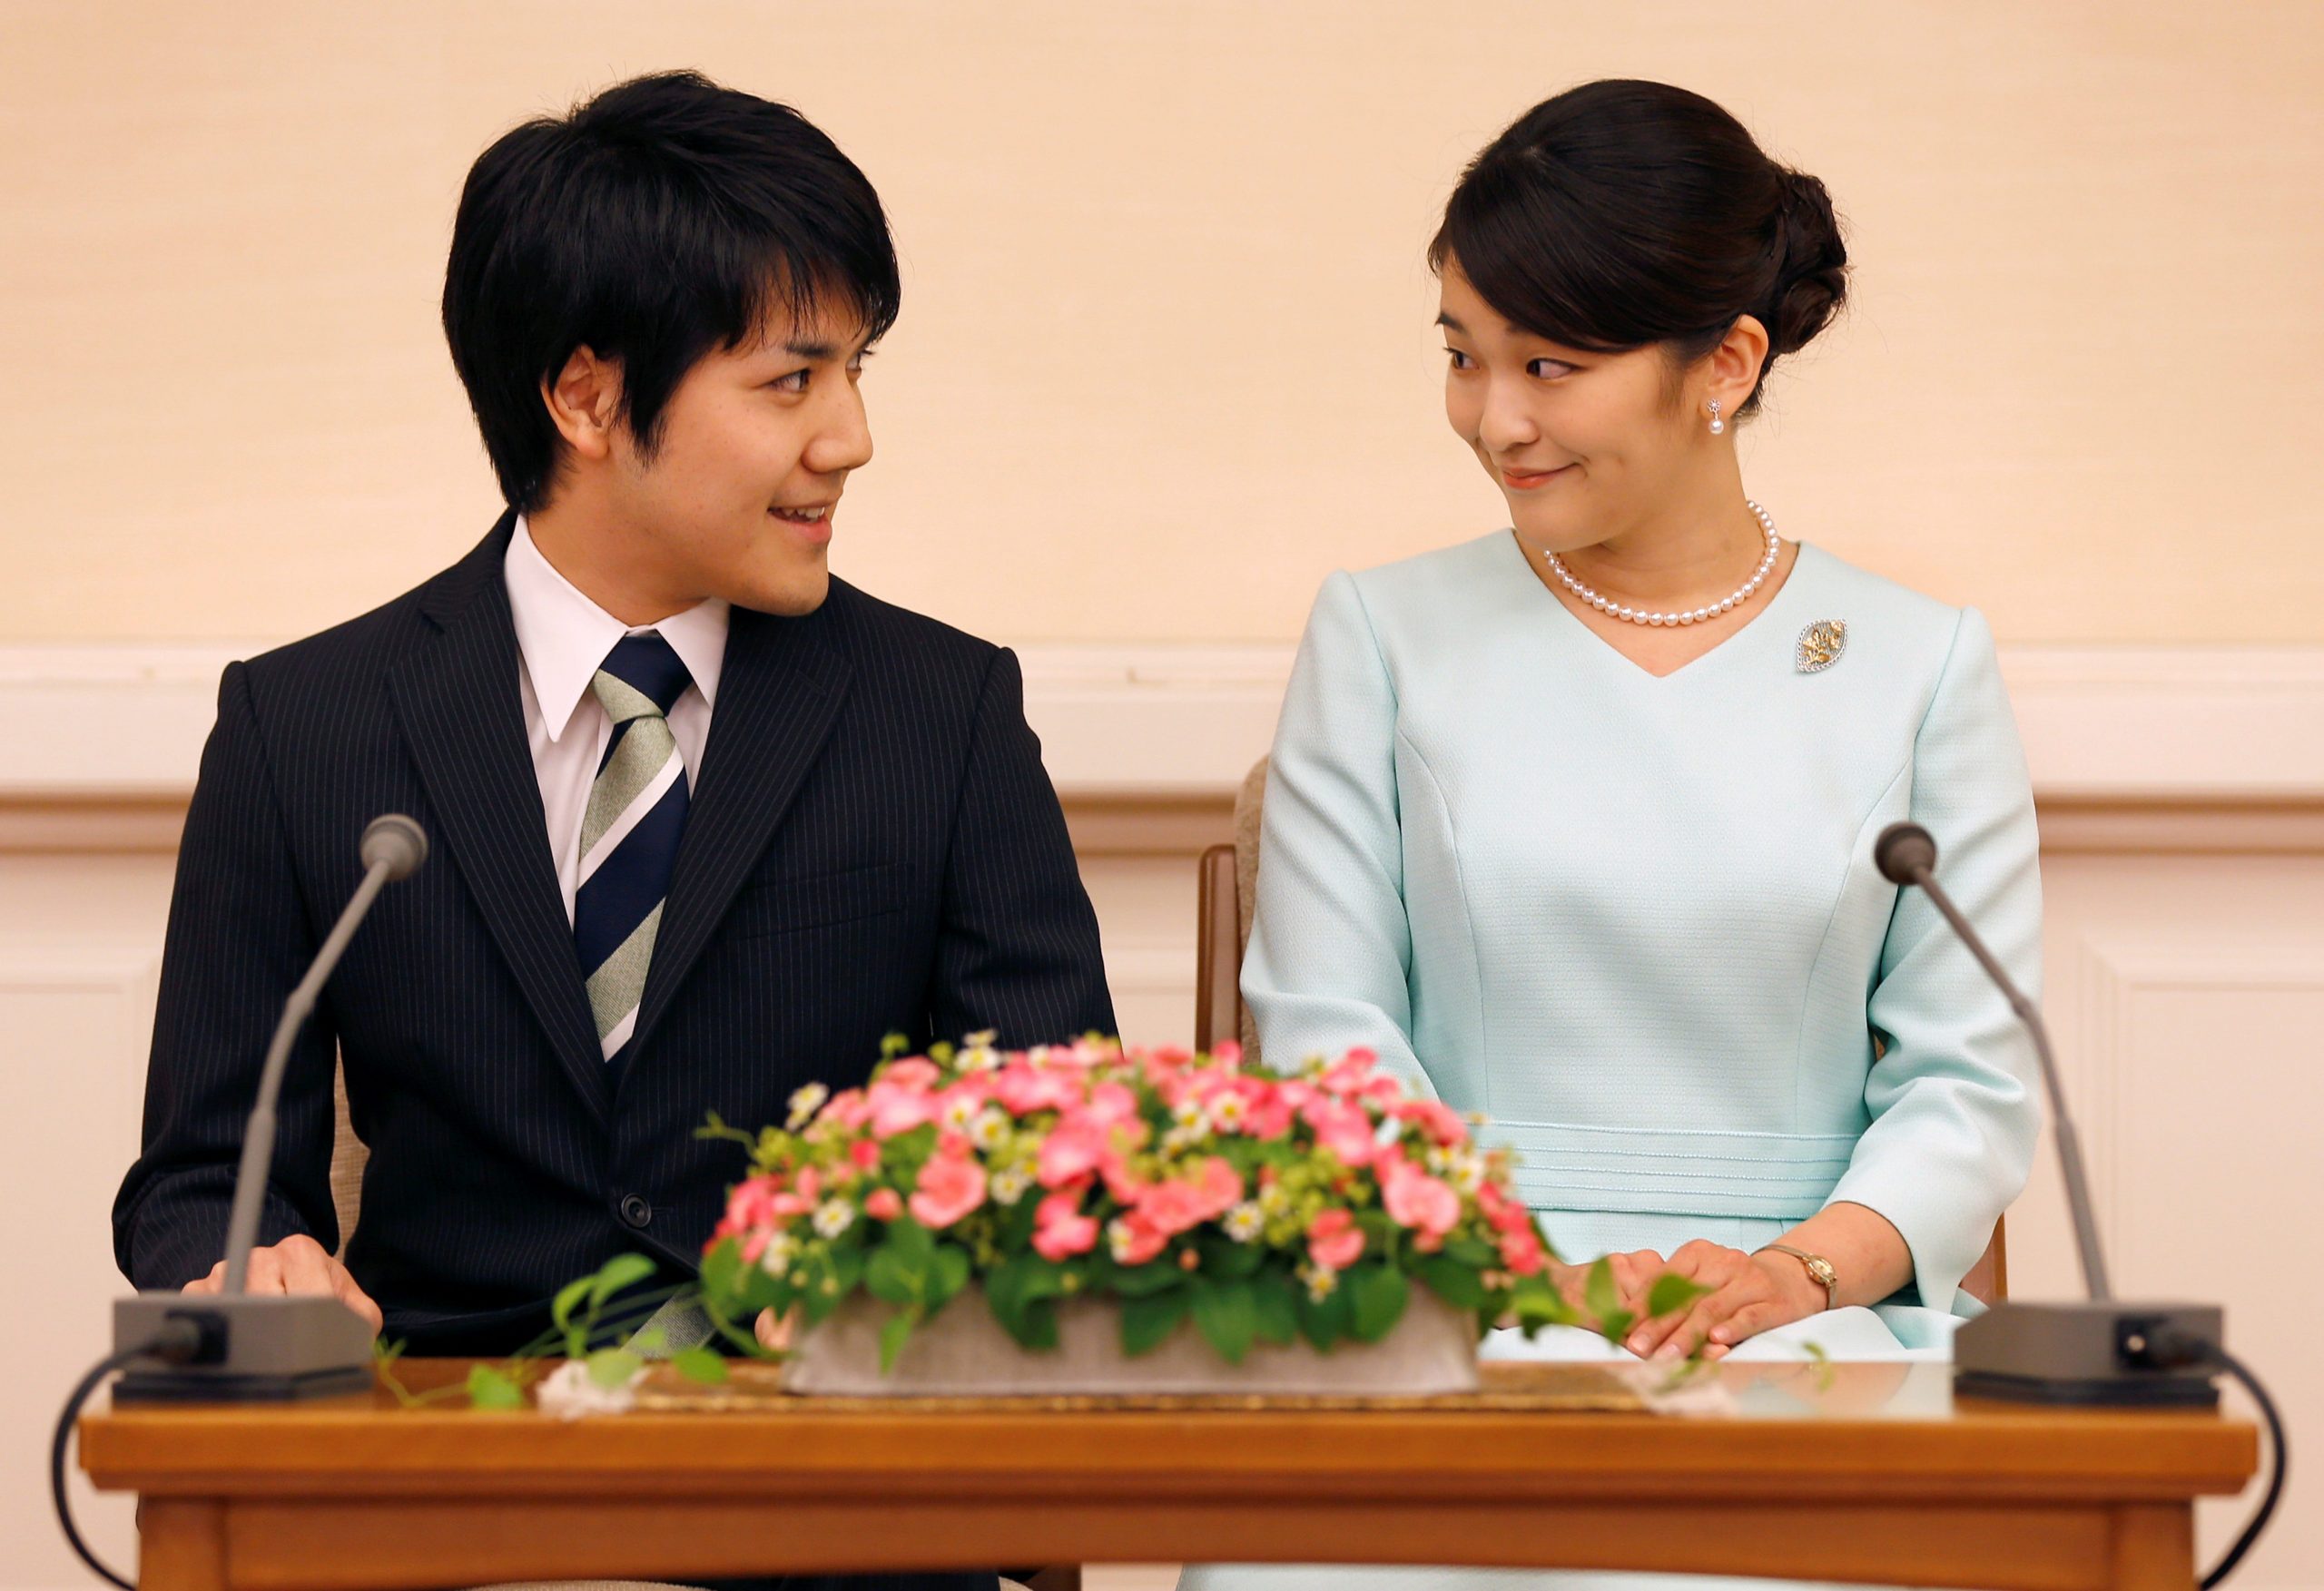 Princess Mako (right) of Japan and her fiancé Kei Komuro at a press conference to announce their engagement at Akasaka East Residence in Tokyo in 2017.